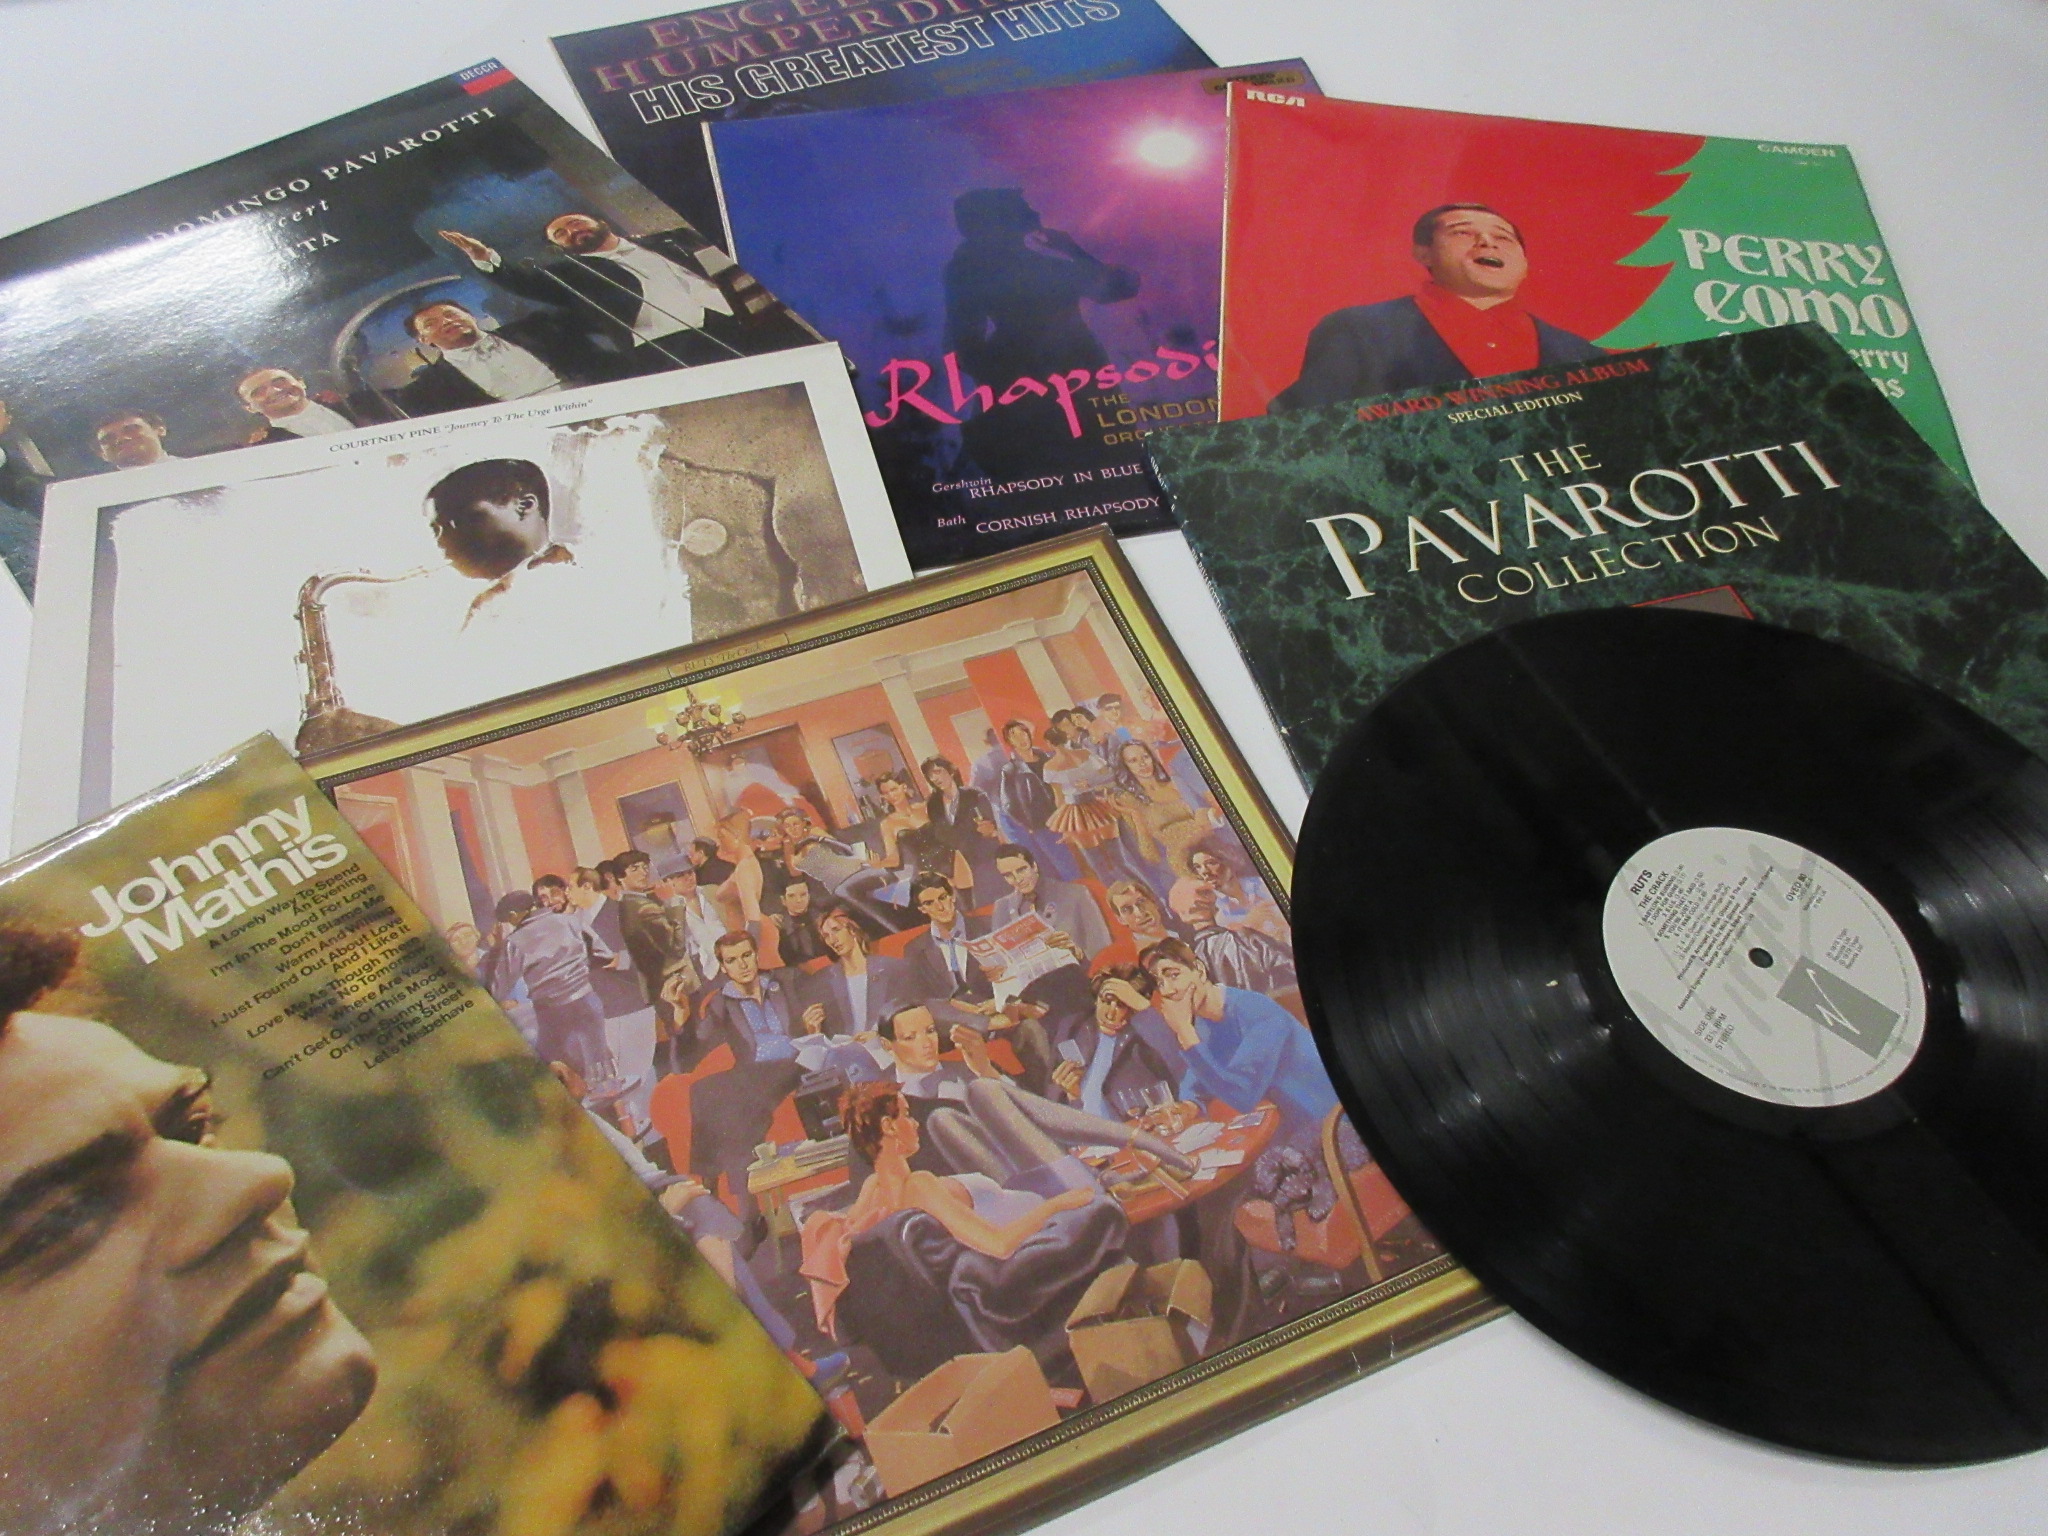 8 LPS, all the classics including BOX CAR WILLIE + GREATEST HITS OF JOHANN STRAUSS + KENNY BALL - Image 2 of 2